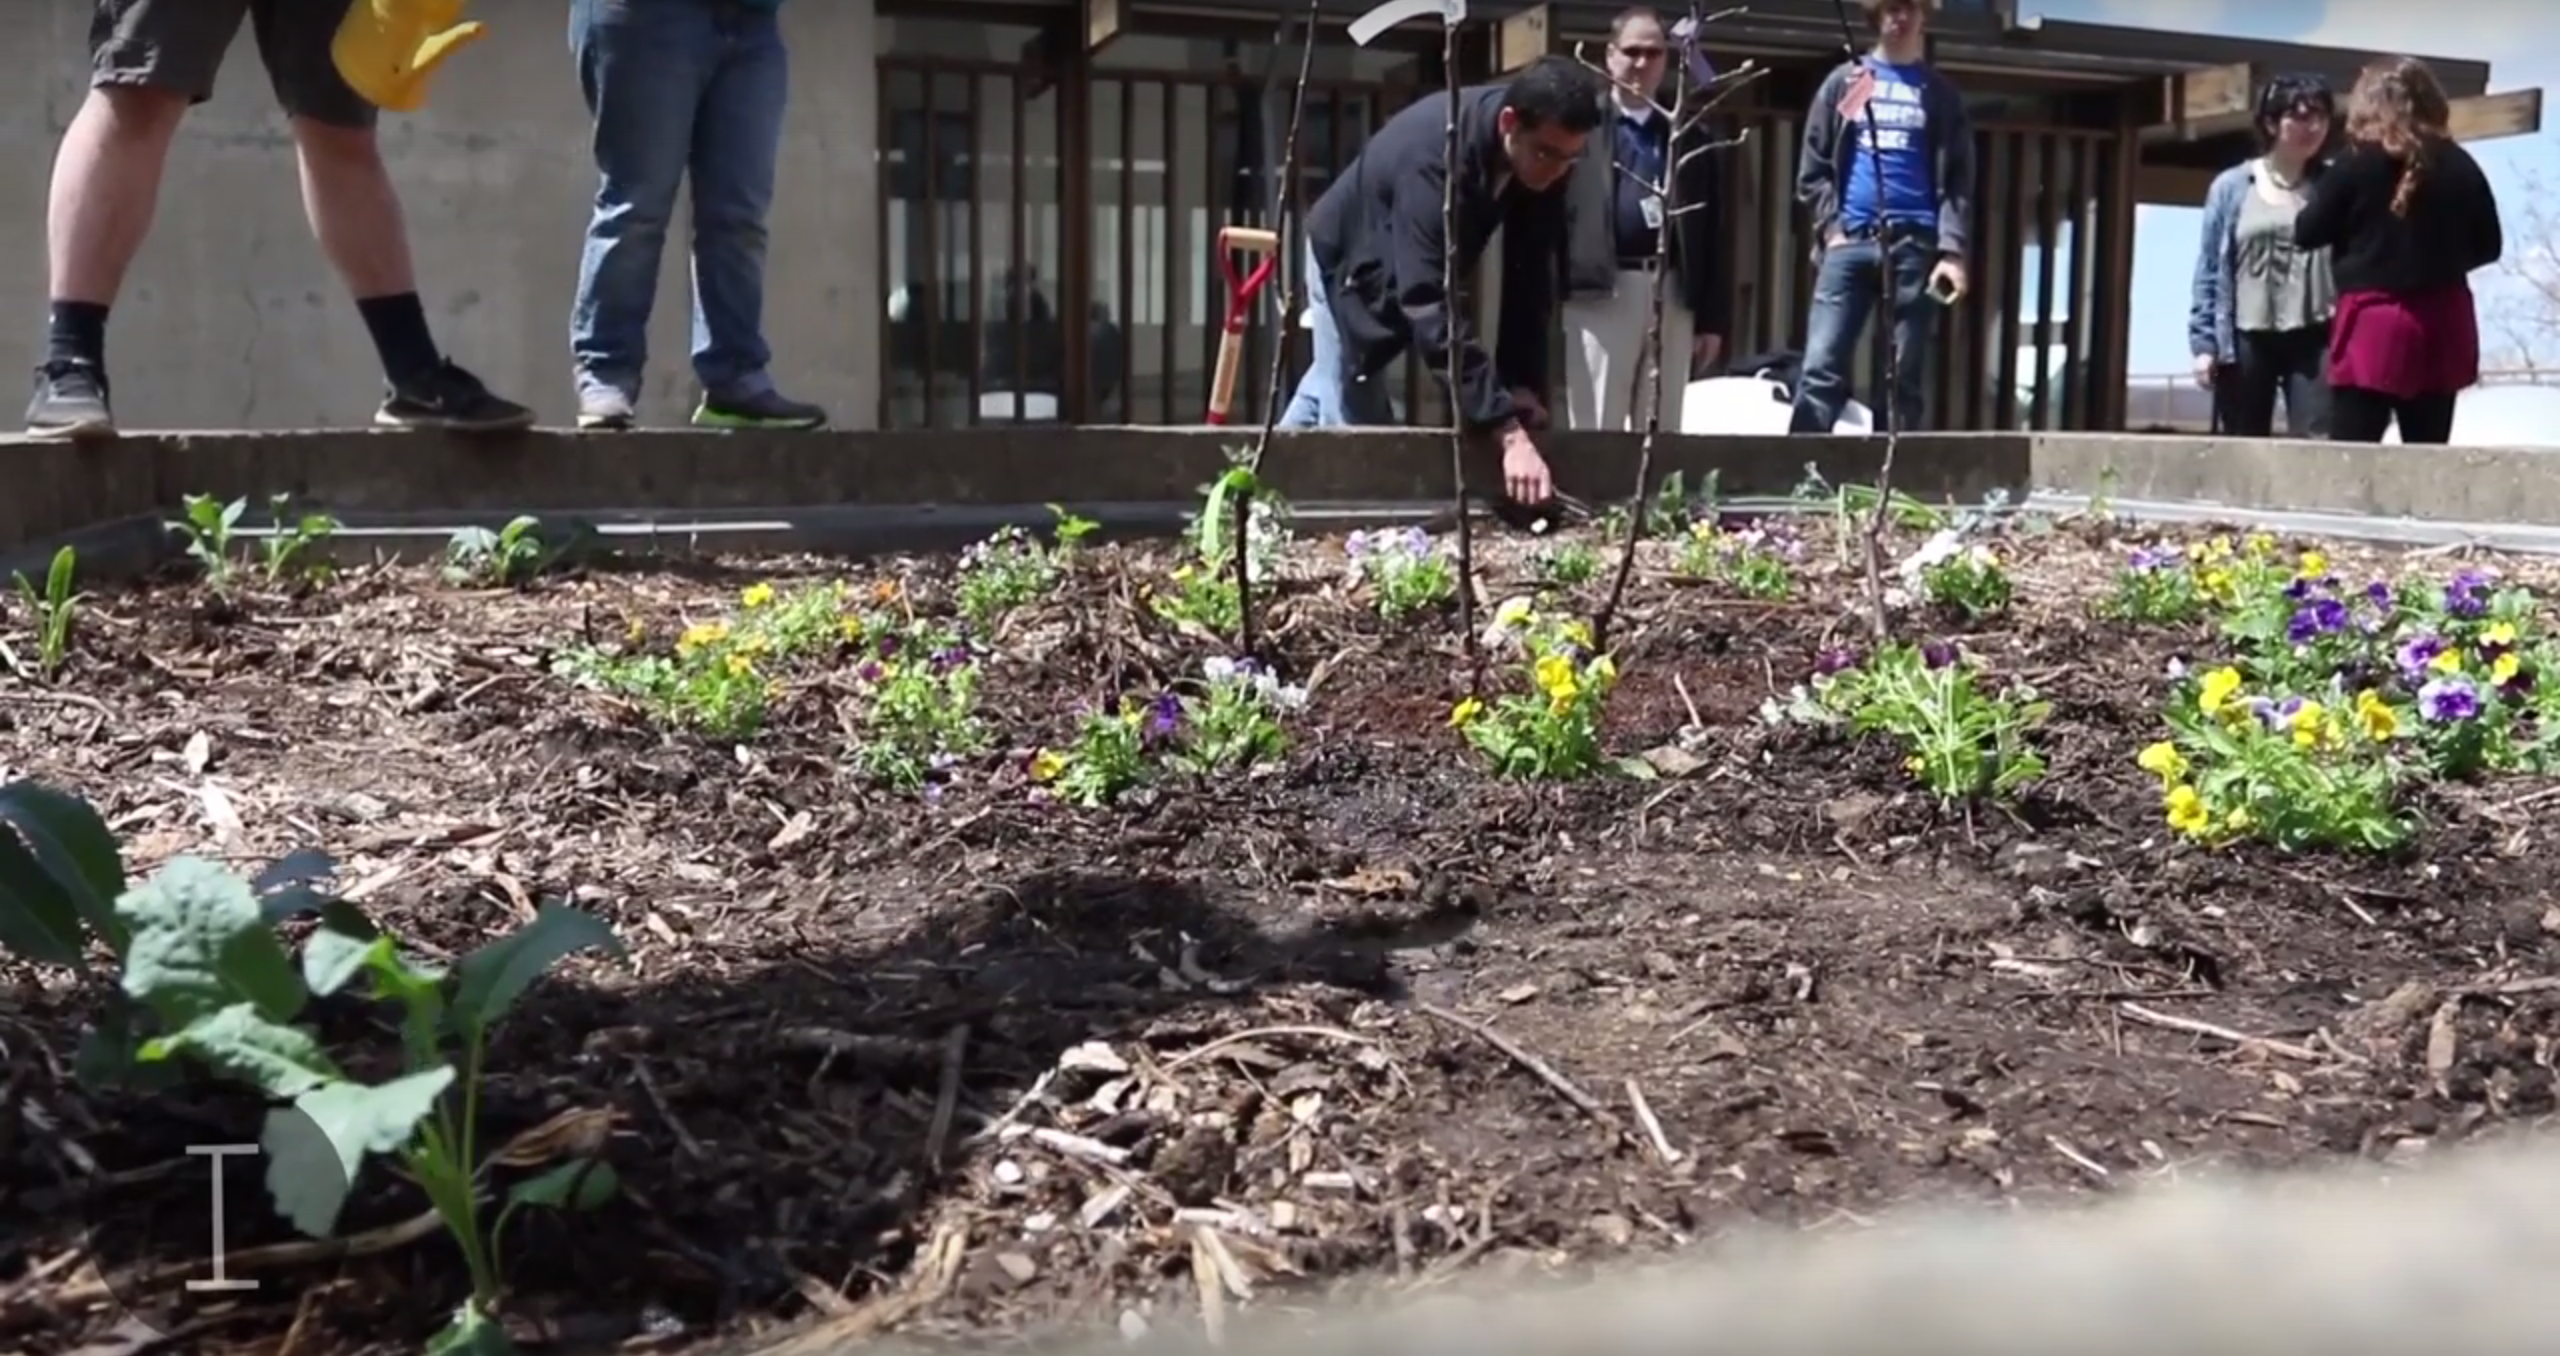 Plant-A-Palooza – Ithaca College’s rooftop garden